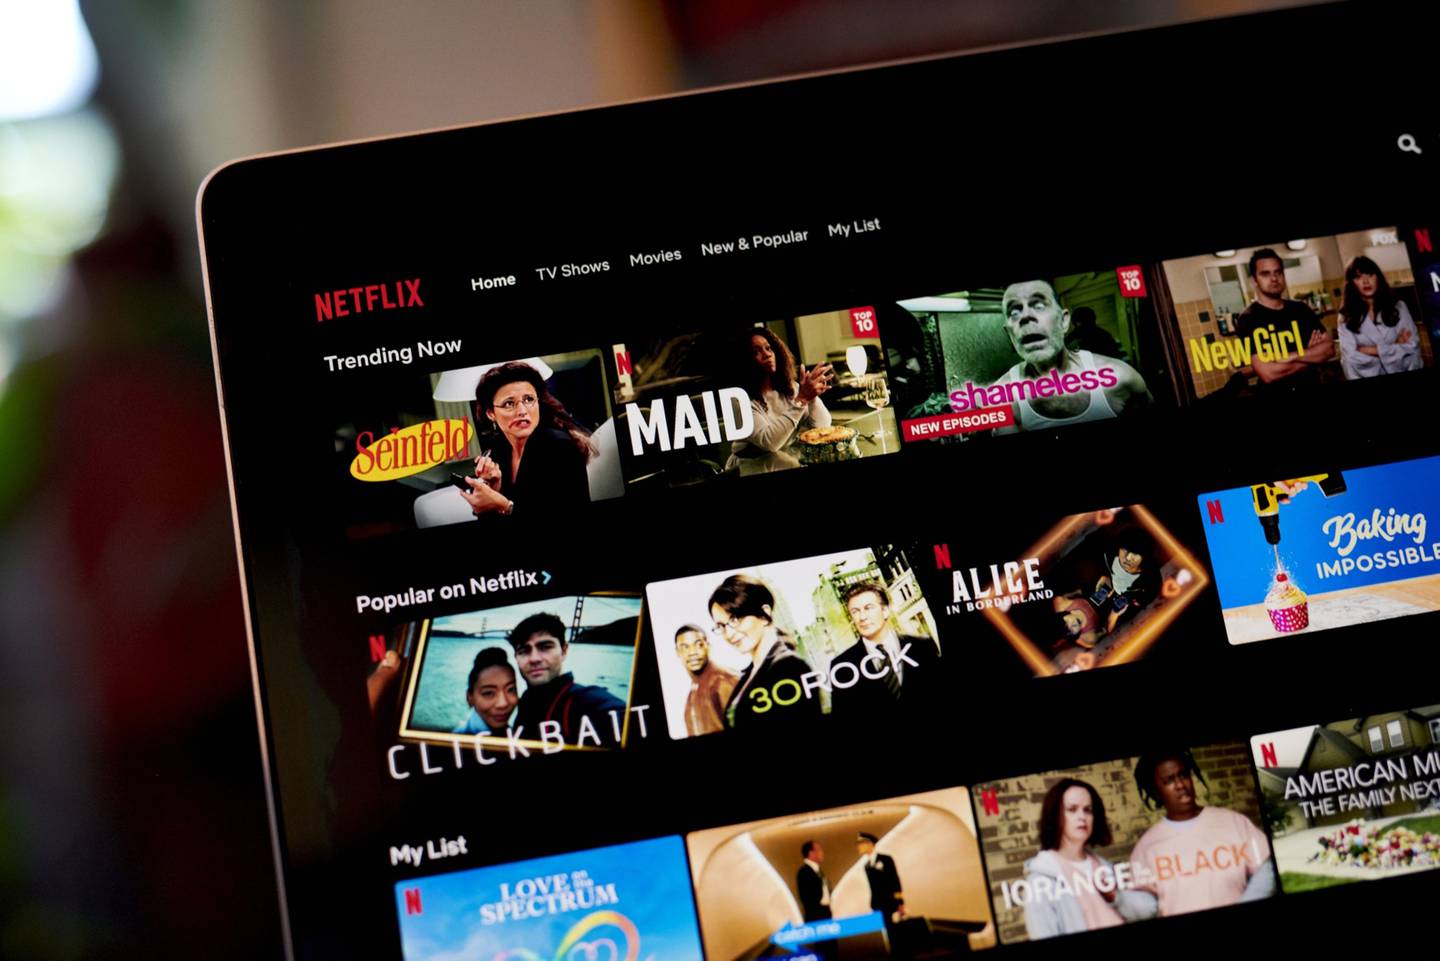 The Netflix Inc. website is displayed on a laptop computer in an arranged photograph taken in the Brooklyn Borough of New York.